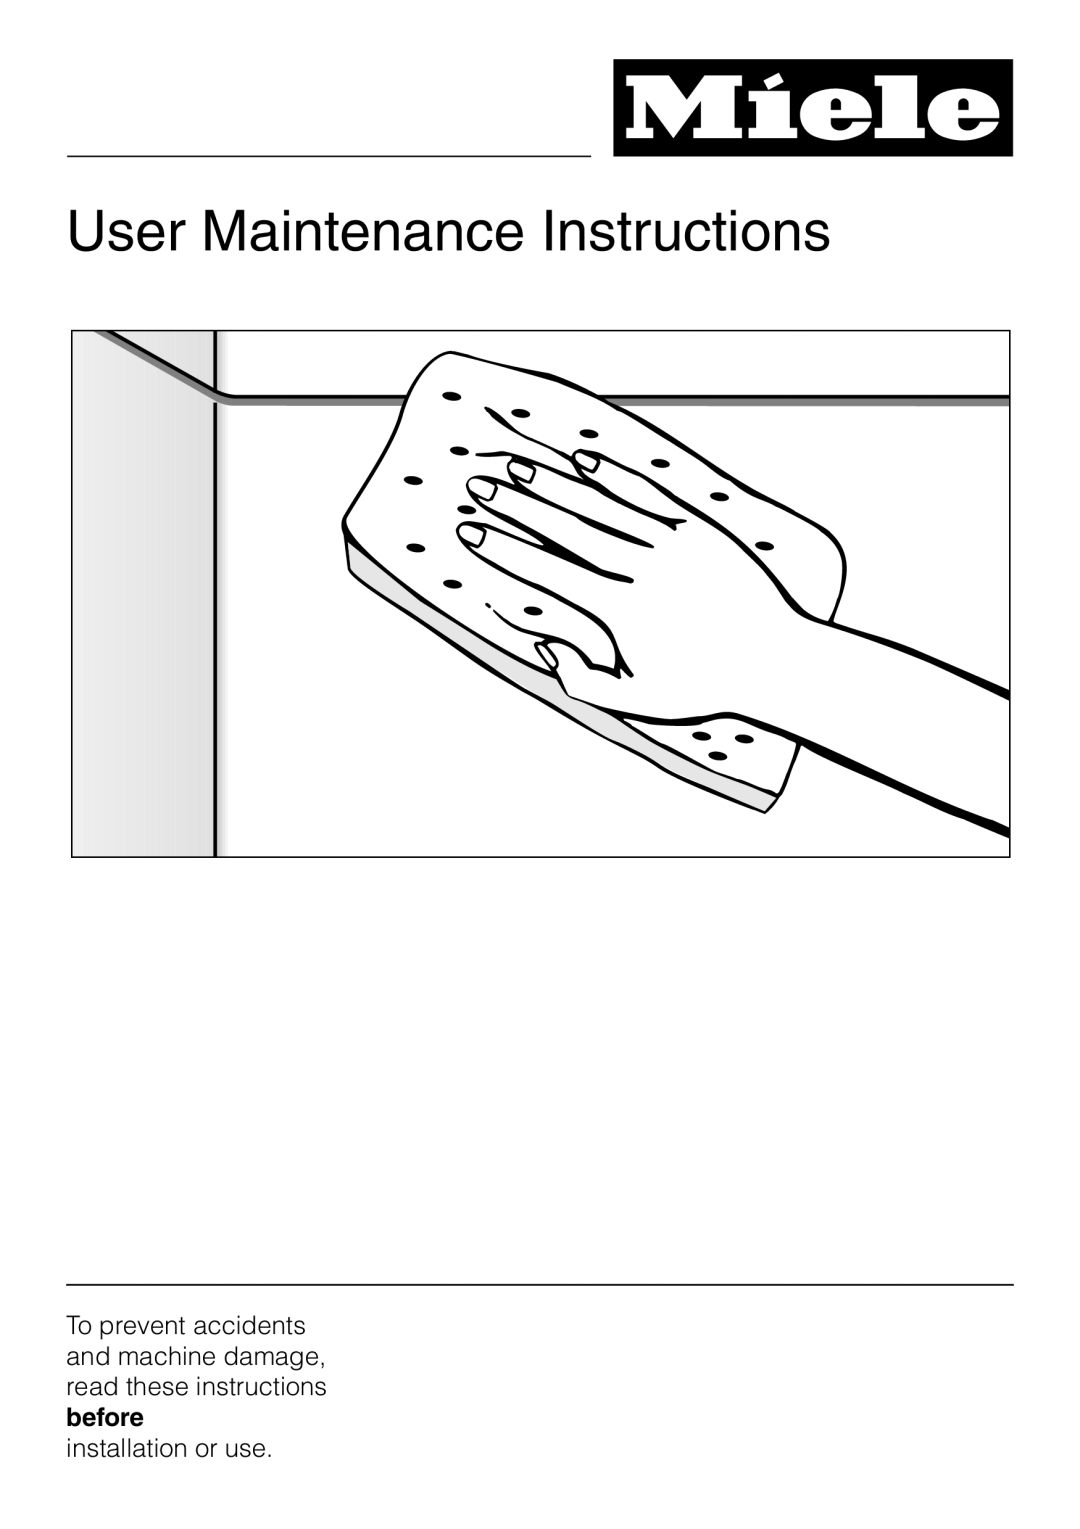 Miele G 856 SC ELITE manual User Maintenance Instructions, installation or use 